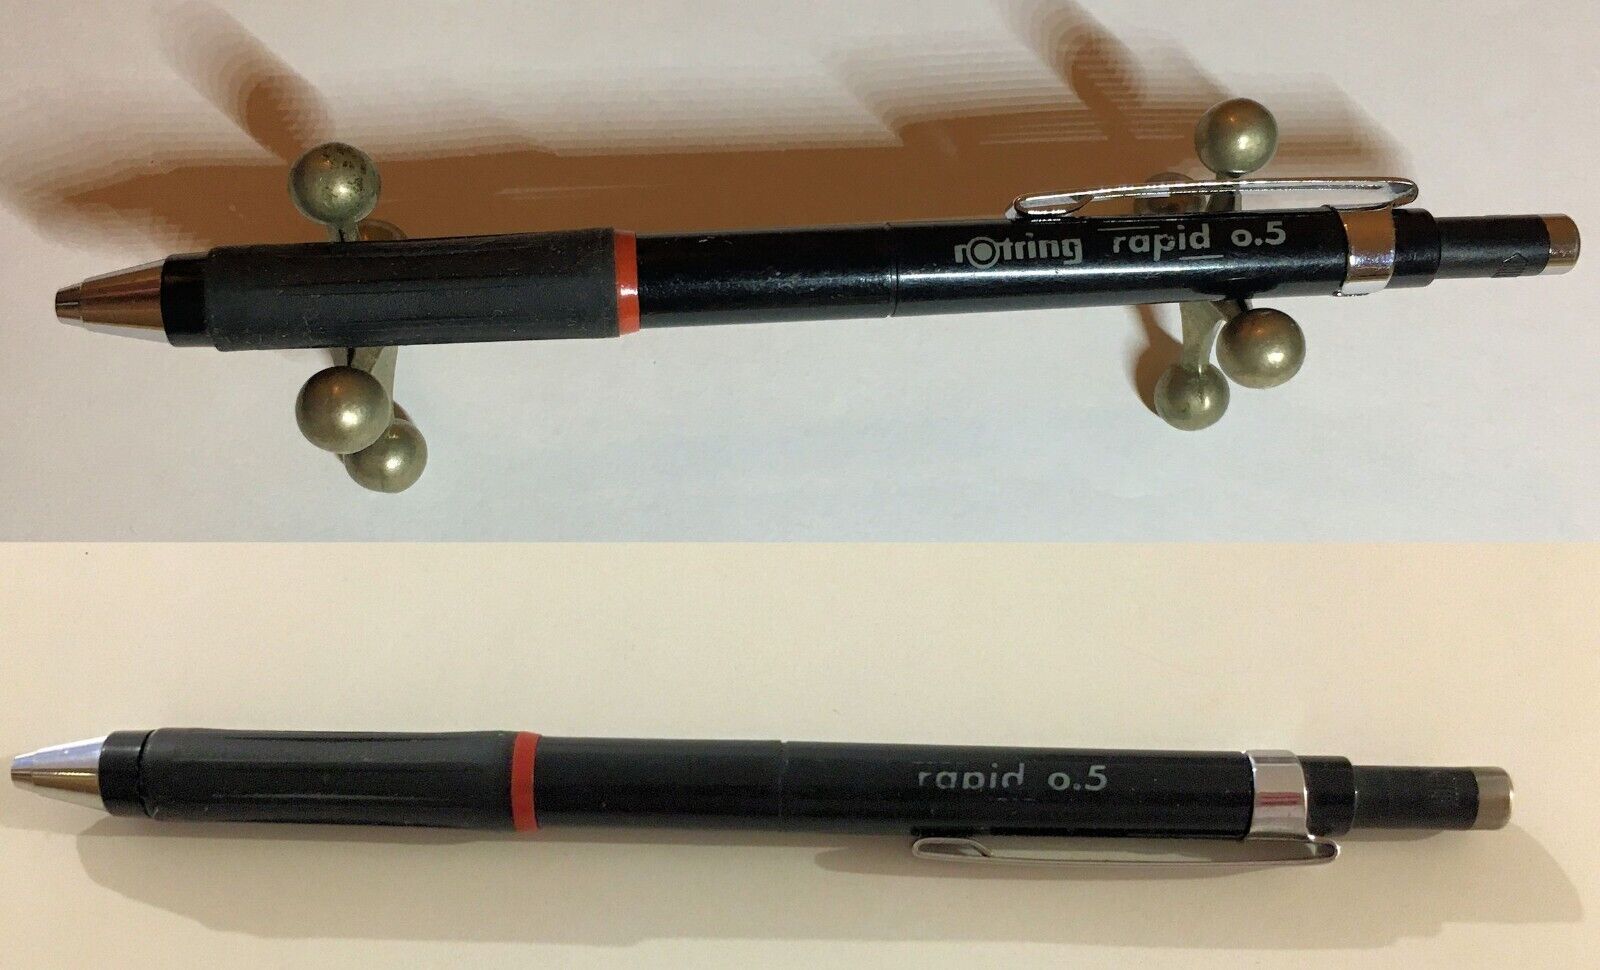 Rotring Techno 0.5 0,5 Mechanical technical clutch pencil - $18.00